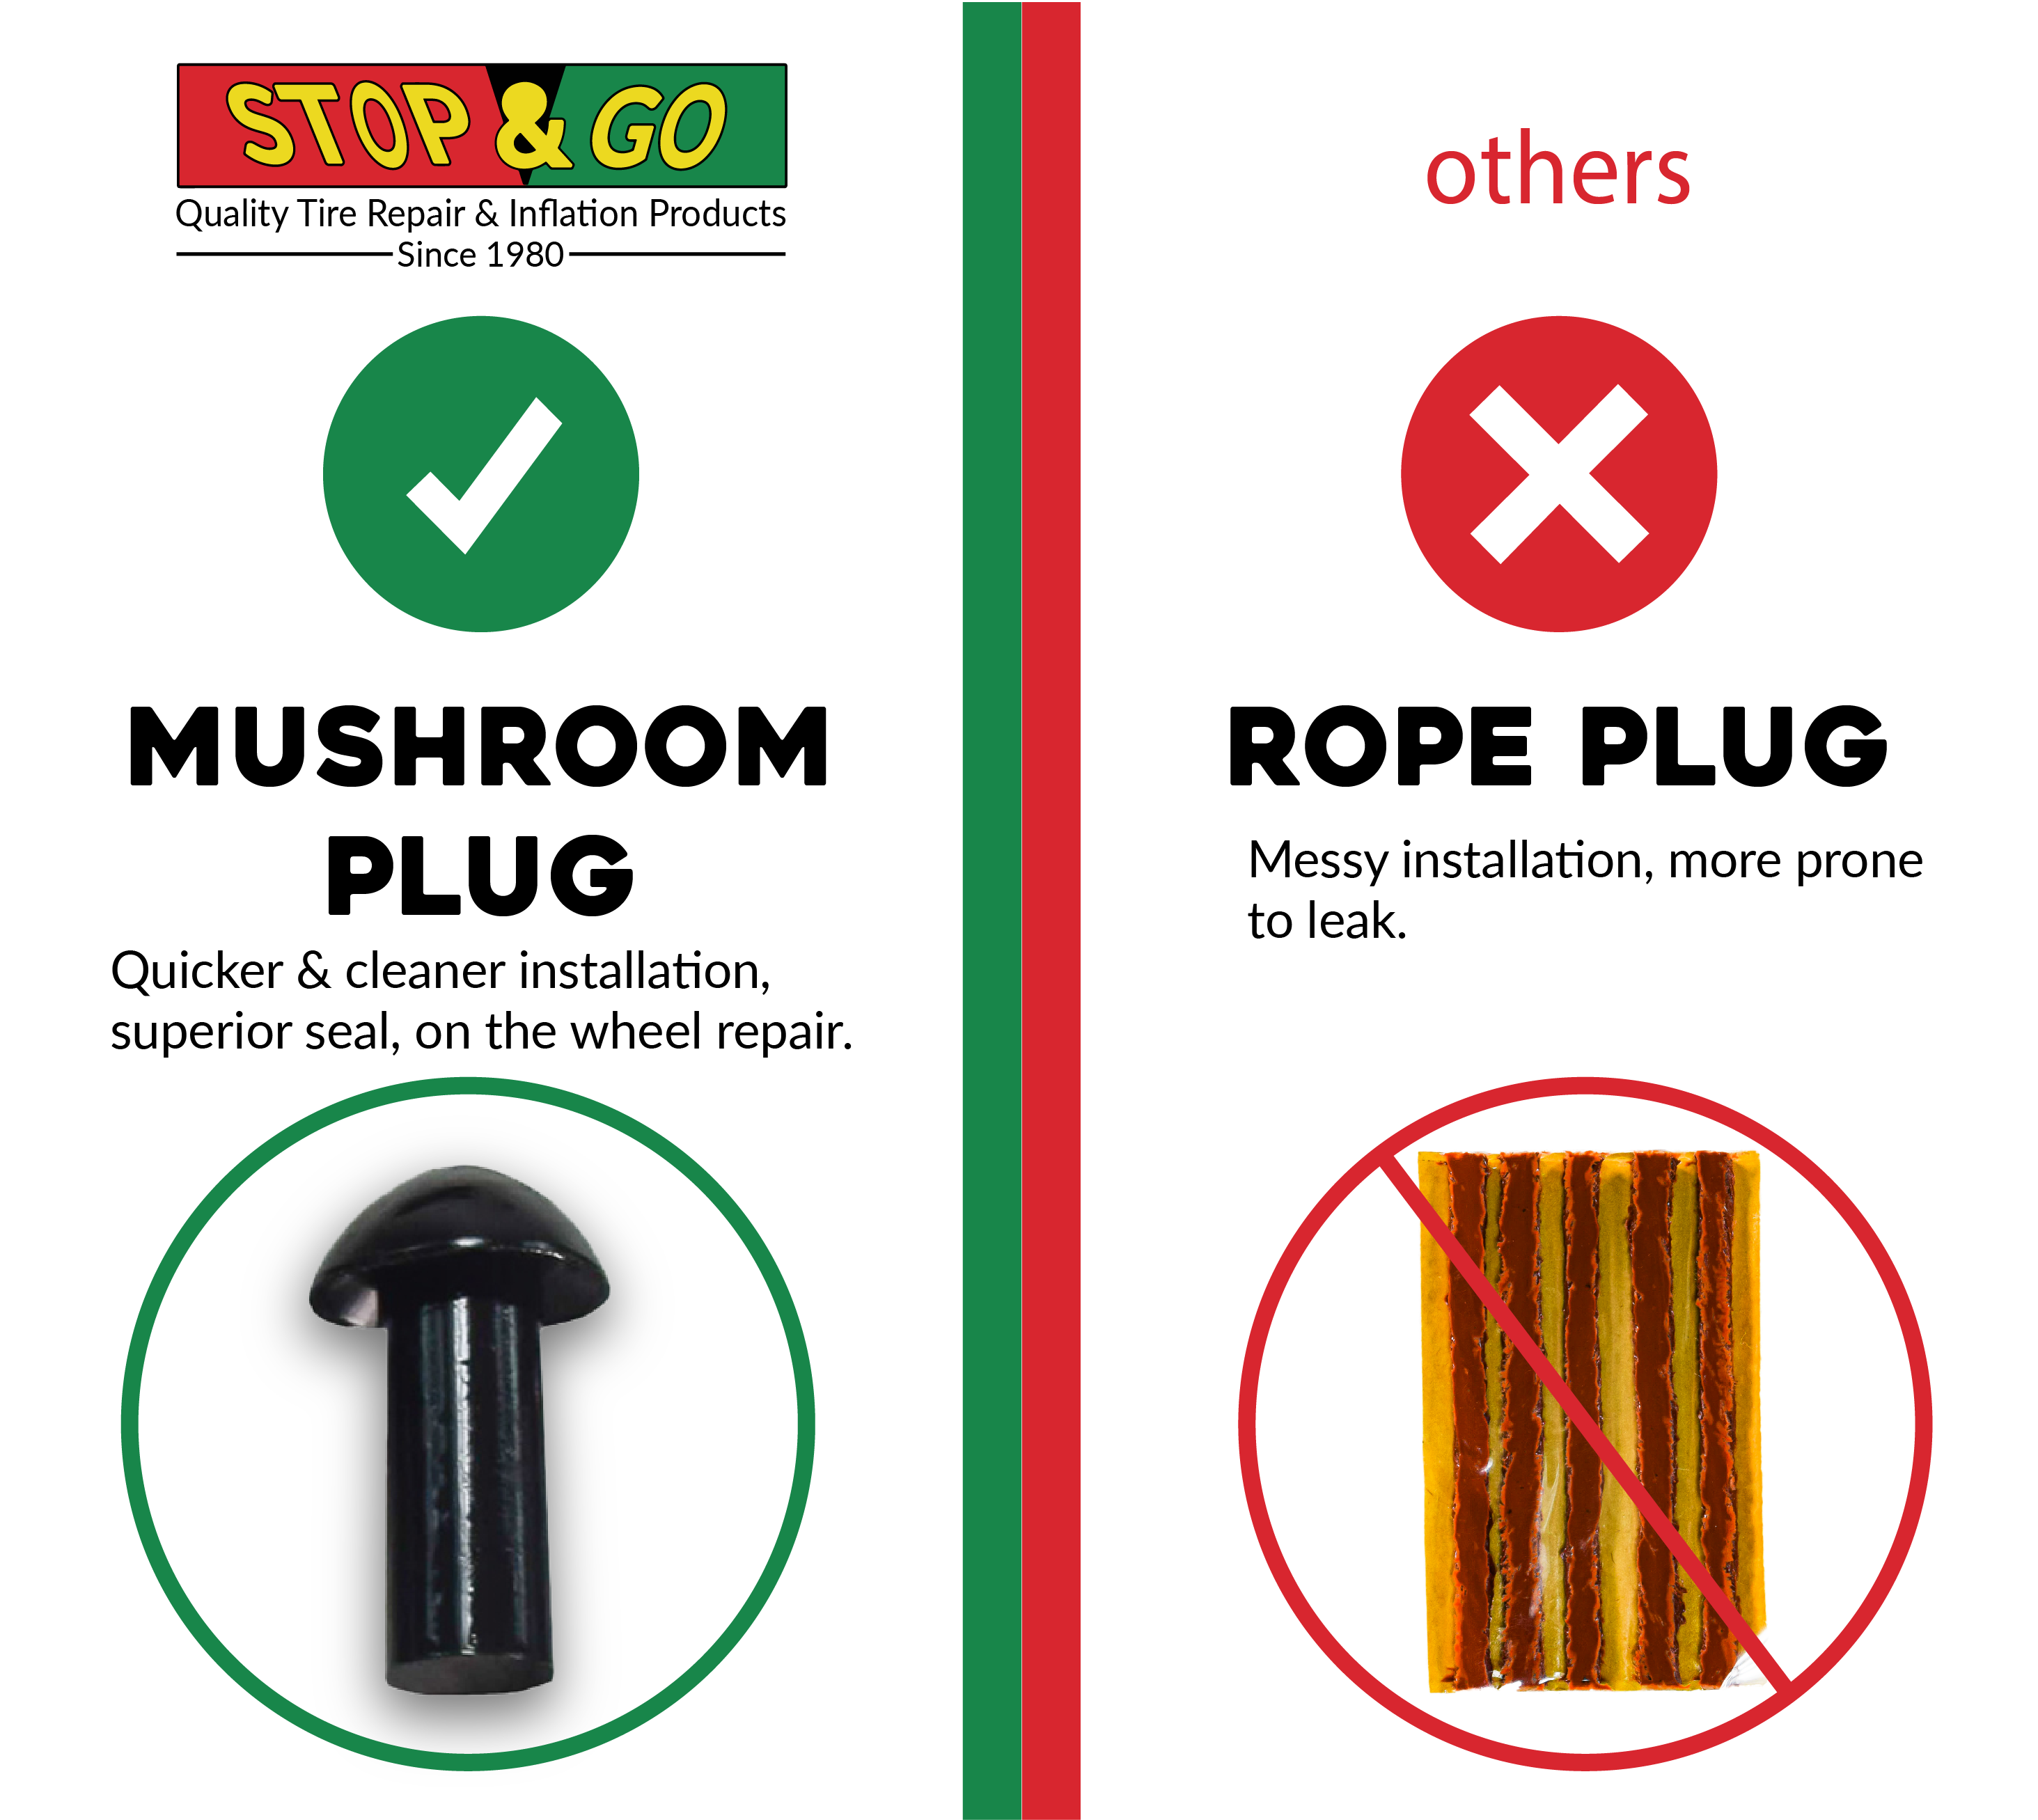 Stop-Go-1001-Tubeless-Tire-Pocket-Plugger-Repair-Kit-with-CO2-15-Plugs-image-2